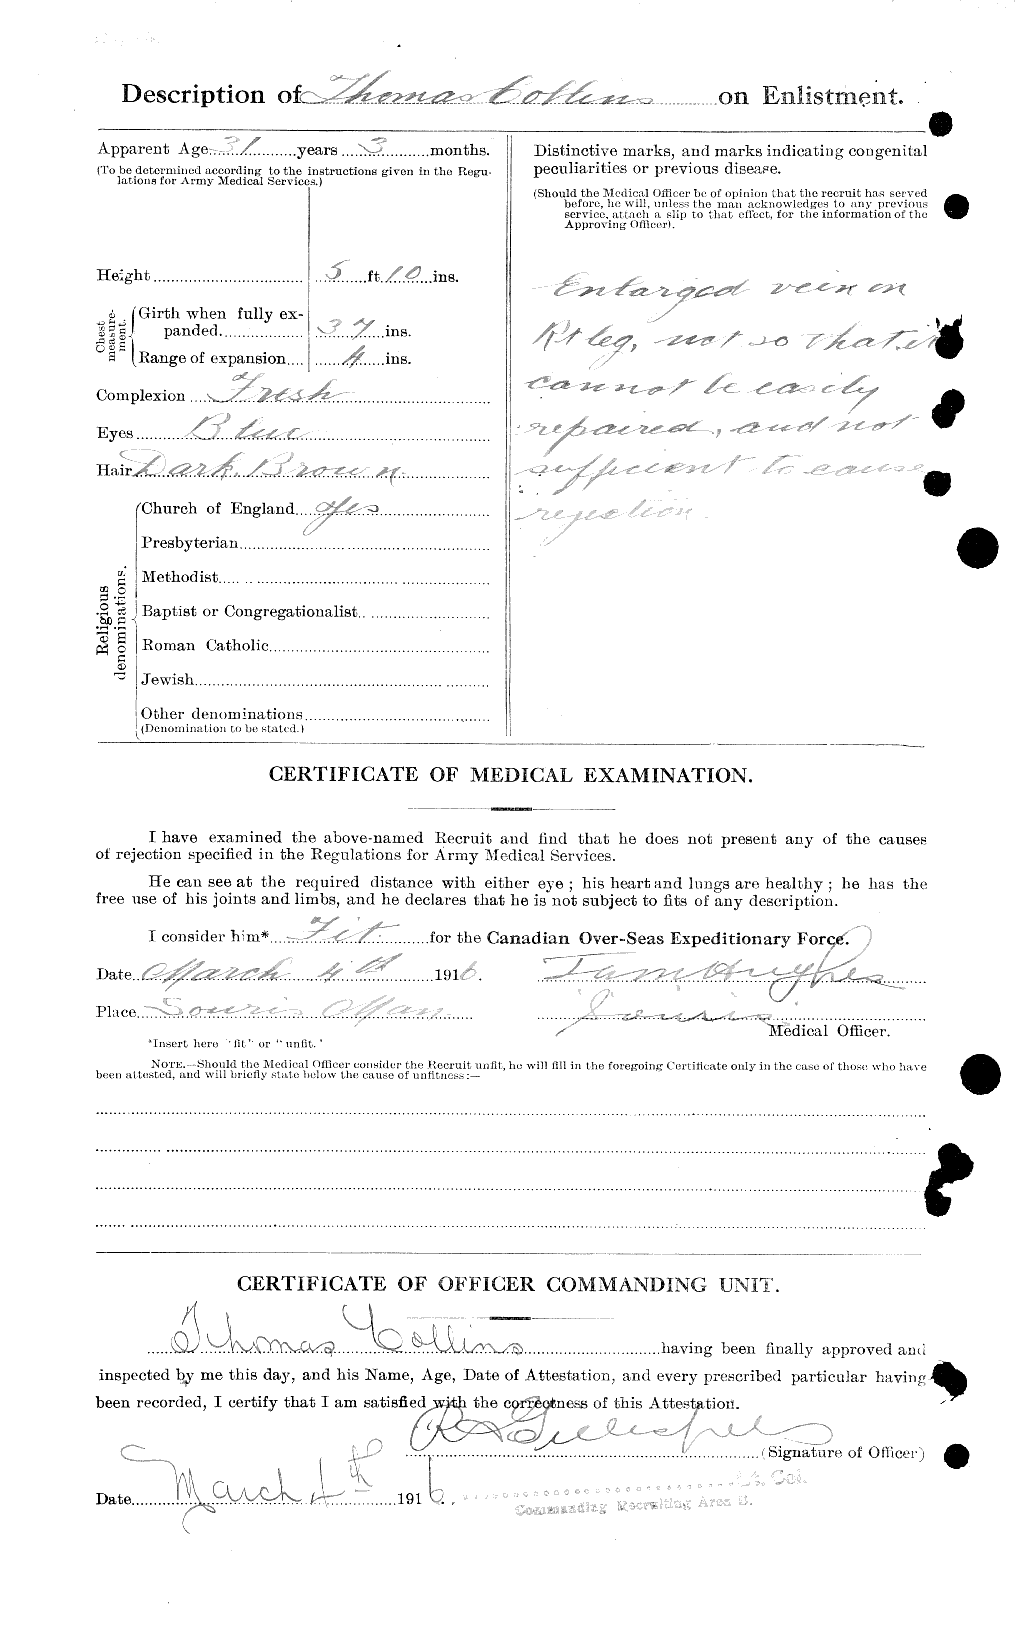 Personnel Records of the First World War - CEF 034568b